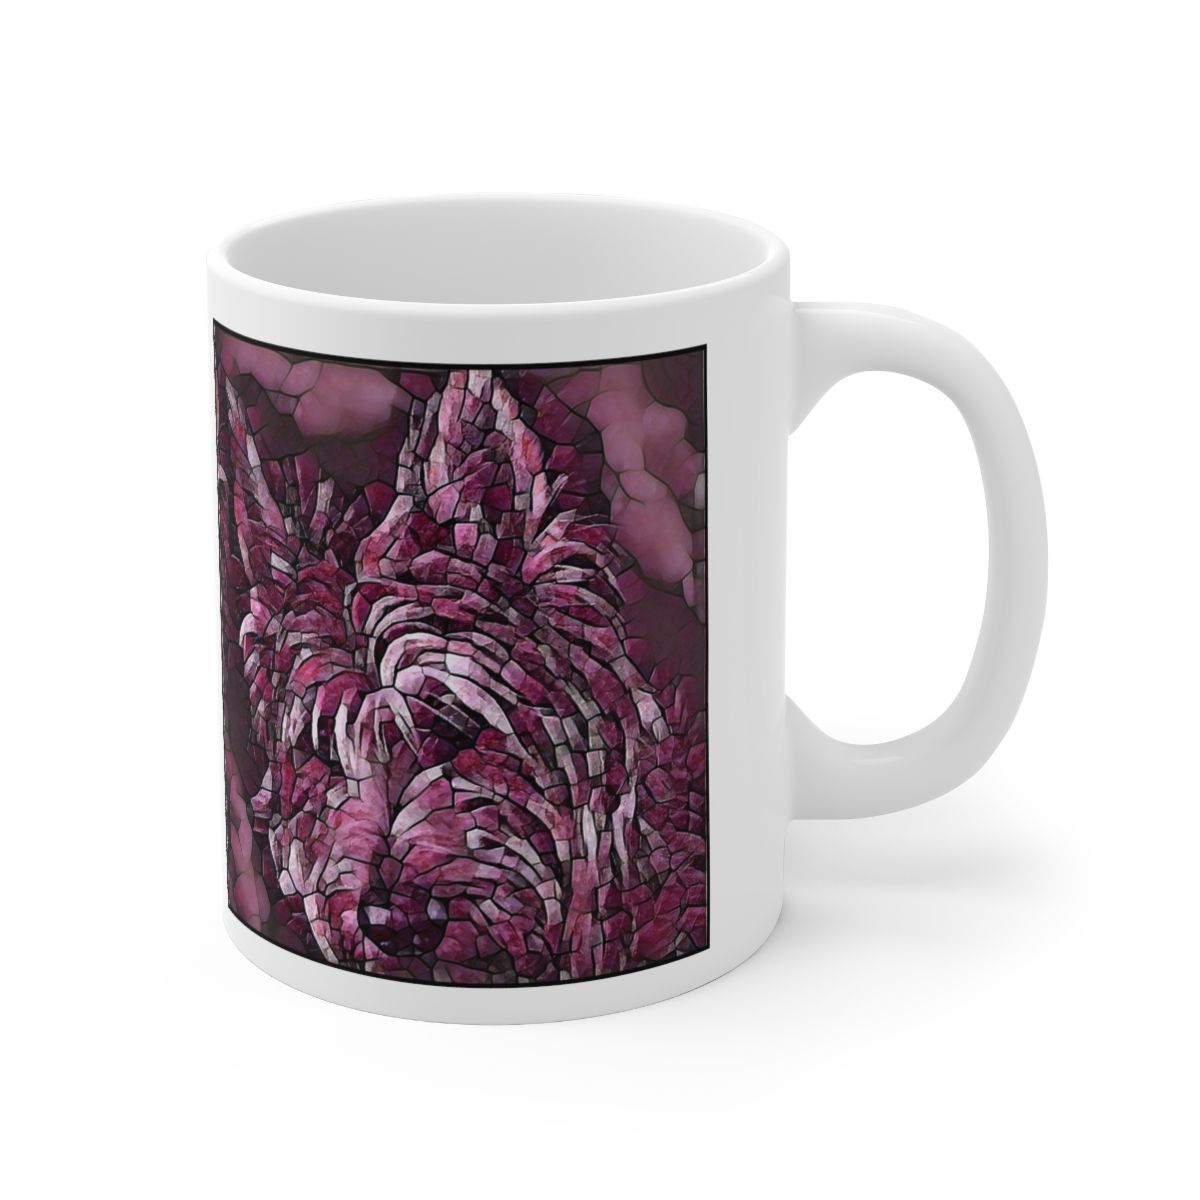 Picture of Berger Picard-Plump Wine Mug